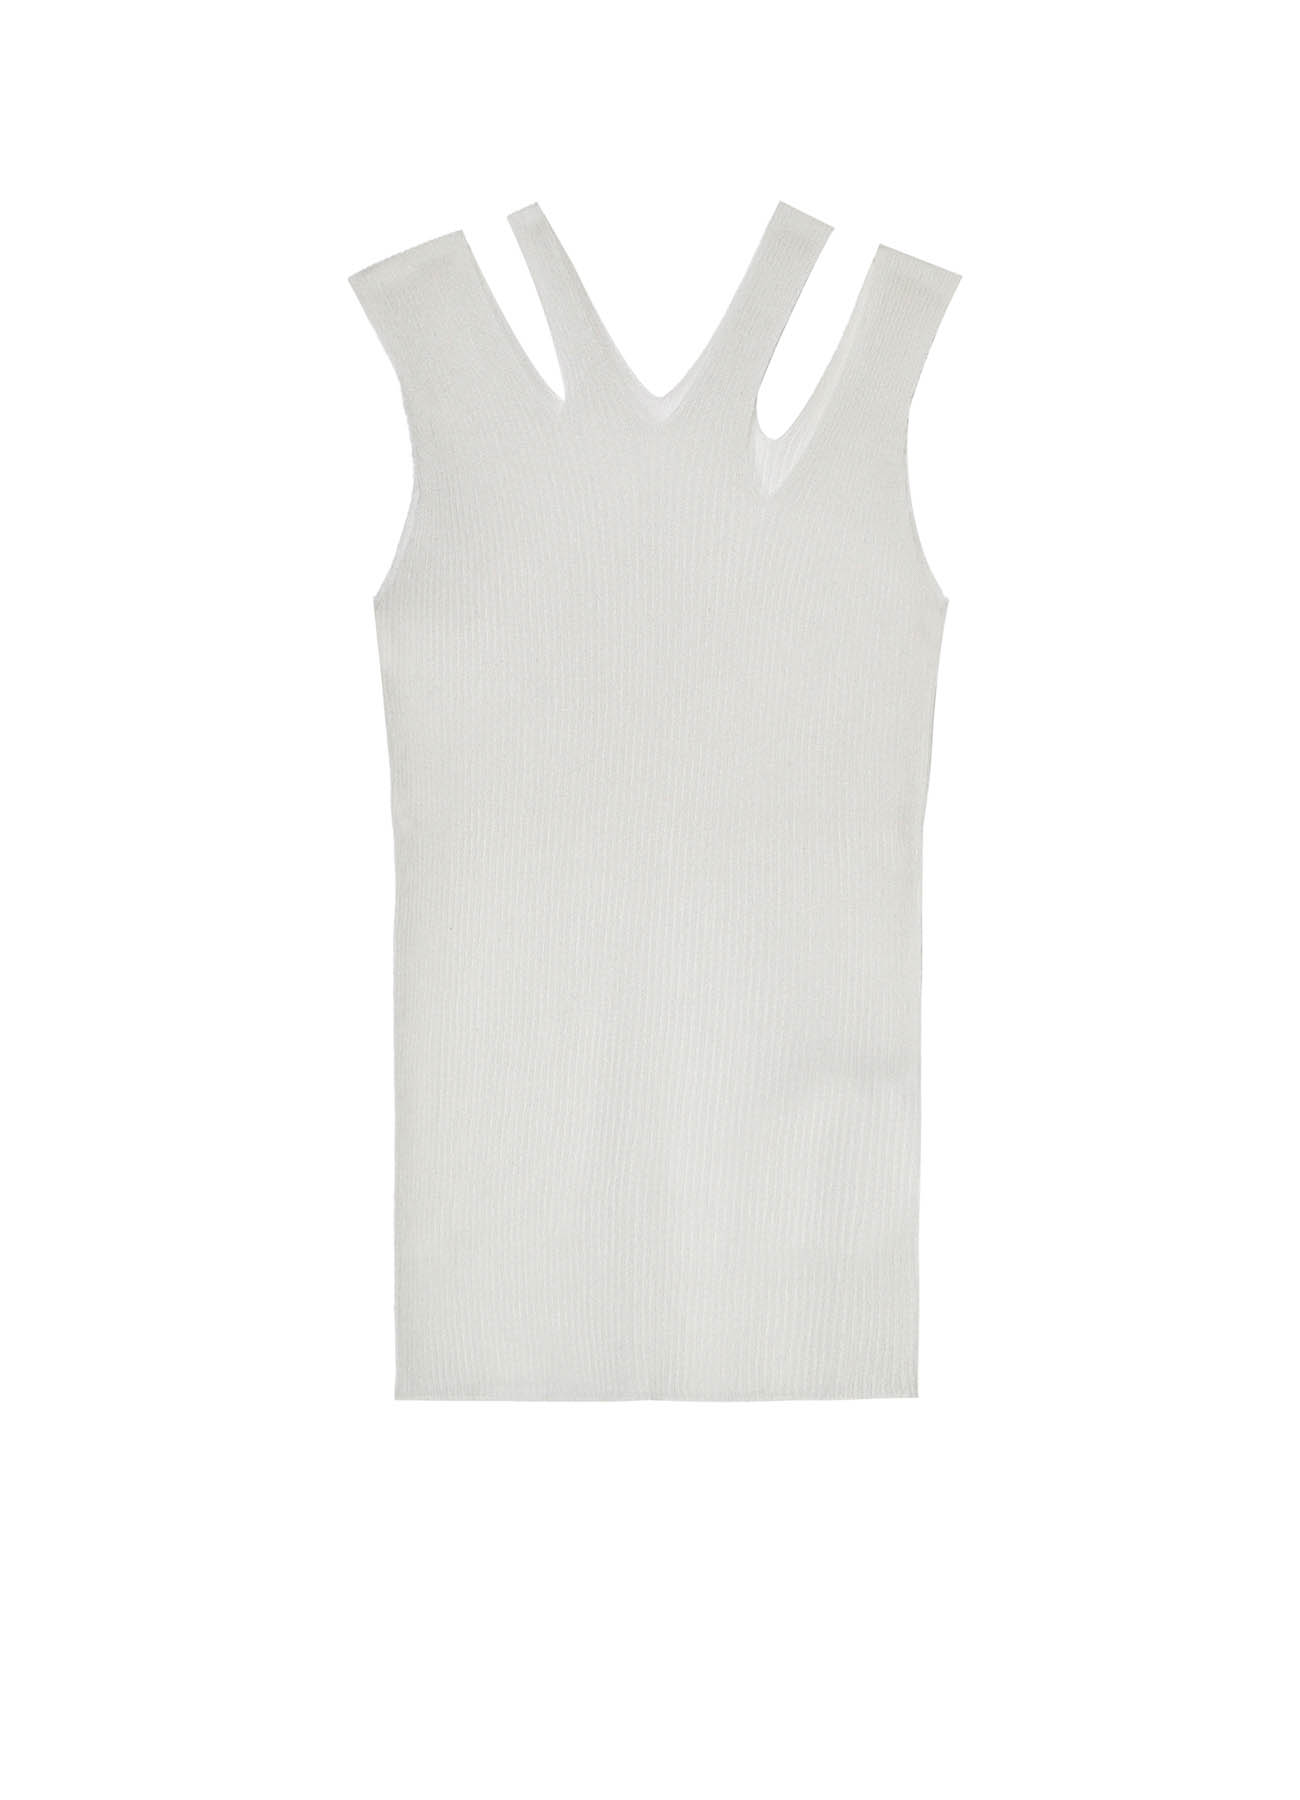 12G 3*3 RIB collections SLEEVELESS TOP A